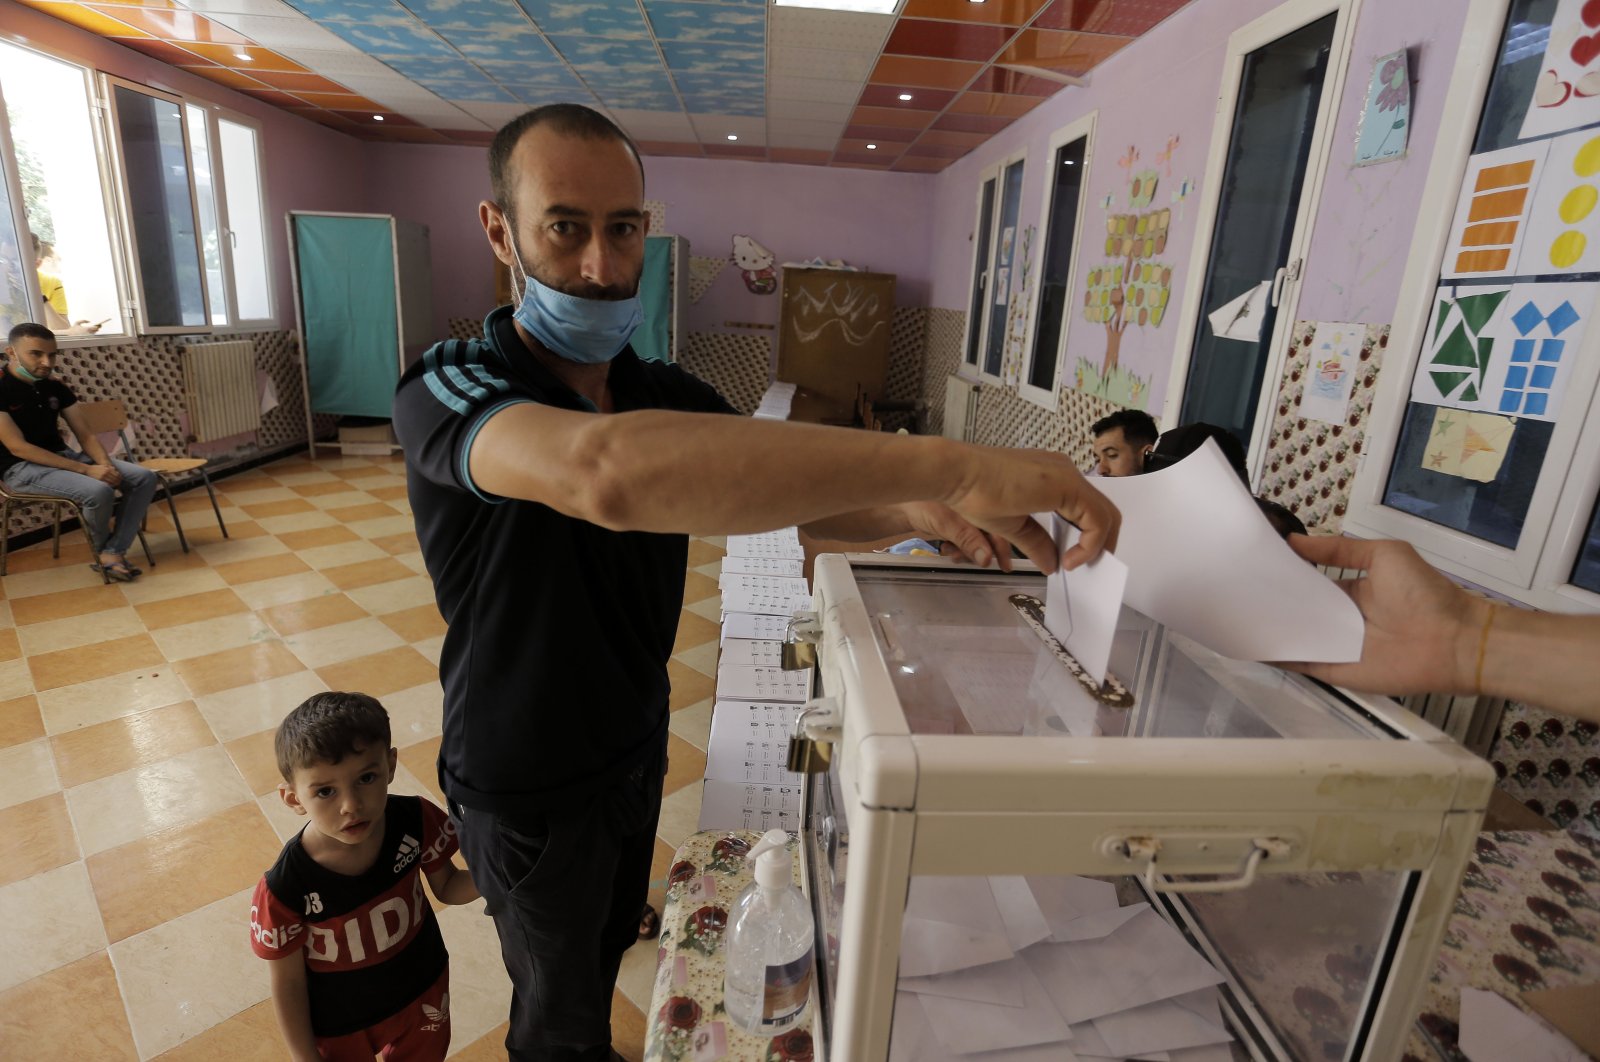 A man casts his vote in a polling station in the country's first legislative elections since the ouster of former President Abdelaziz Bouteflika, in Algiers, Algeria, June 12, 2021. (AP Photo)